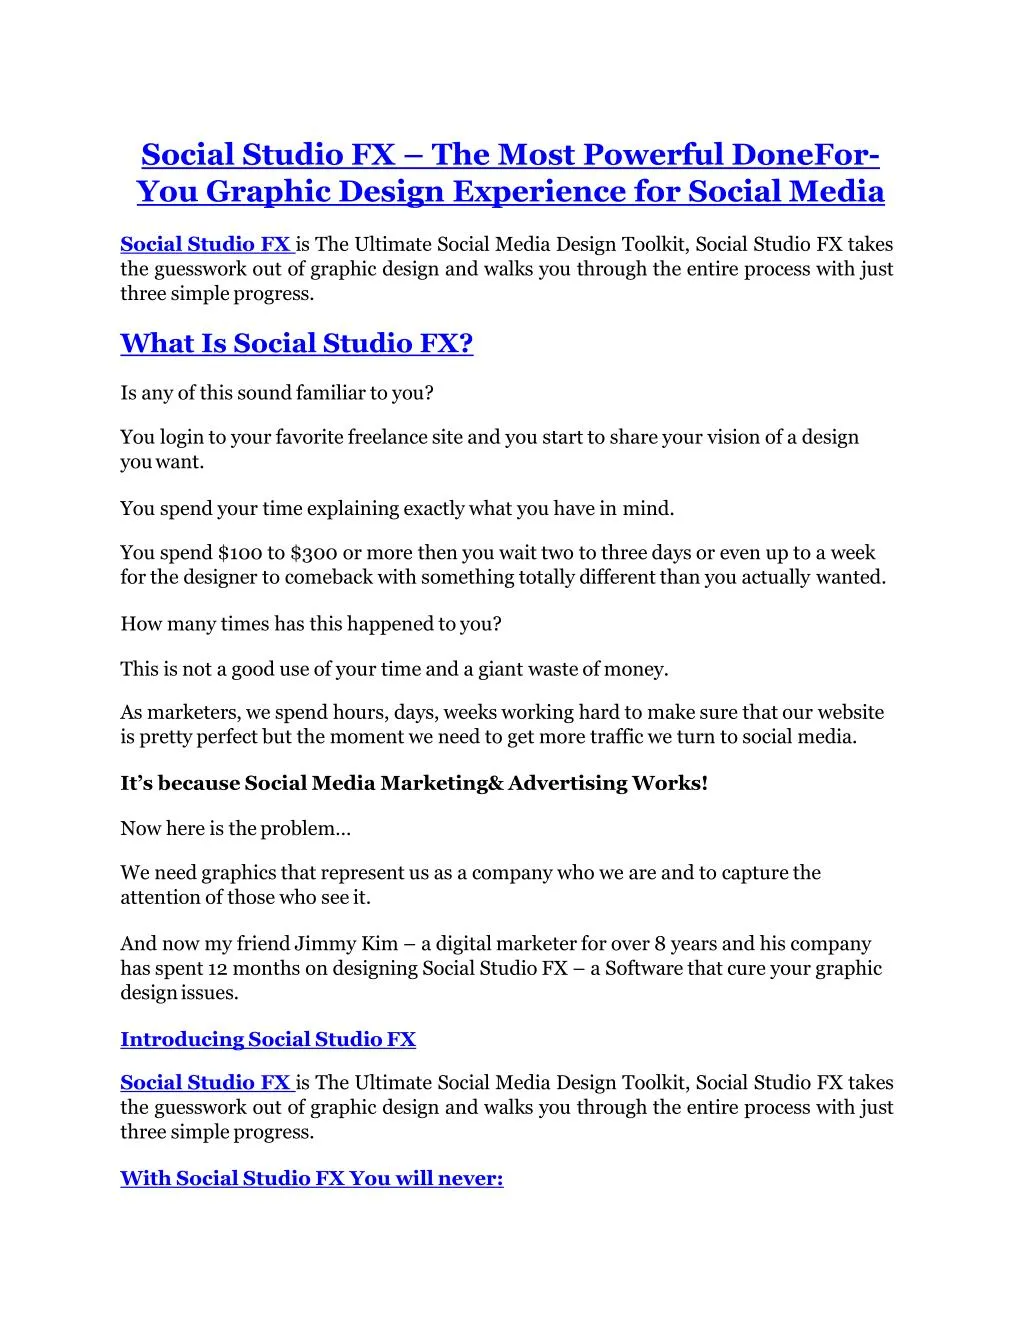 social studio fx the most powerful donefor